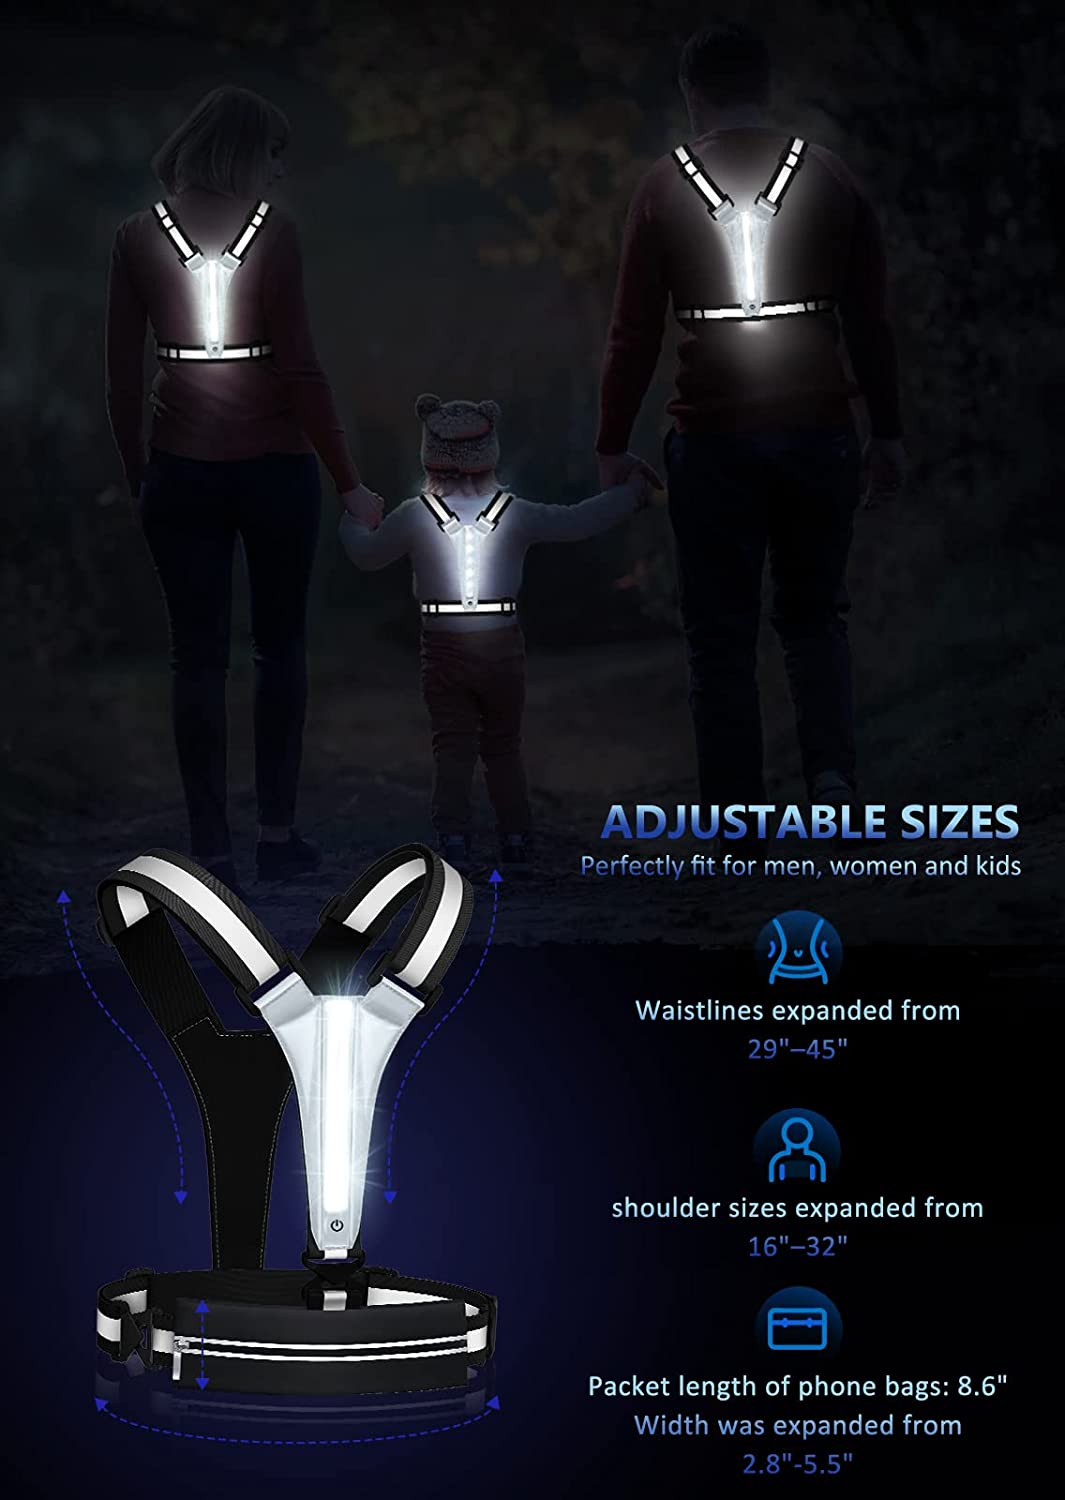  Upgraded LED Reflective Vest Running Gear, USB Rechargeable  Reflective Light Up Running Vest with Waterproof Phone Bag,High Visibility  Night Running Gear with Adjustable Waist&Shoulder for Men Women : Sports 